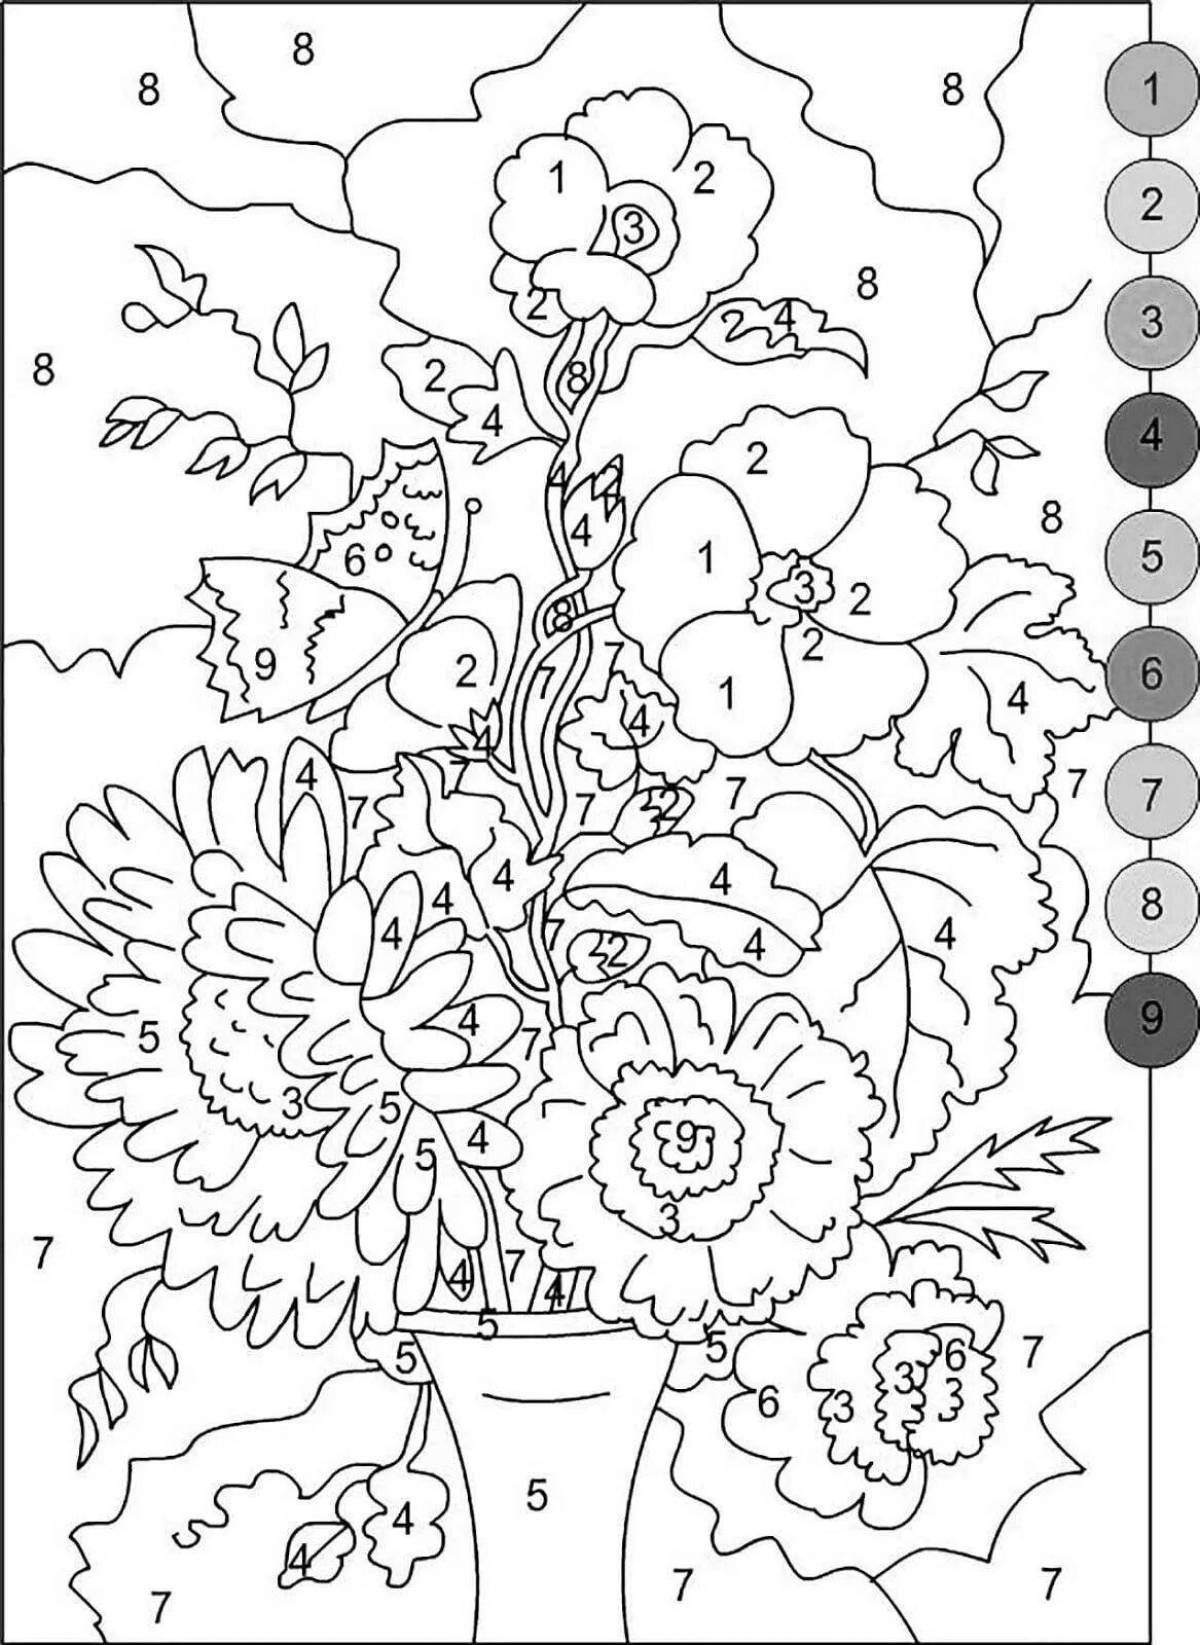 Joyful coloring draw by numbers